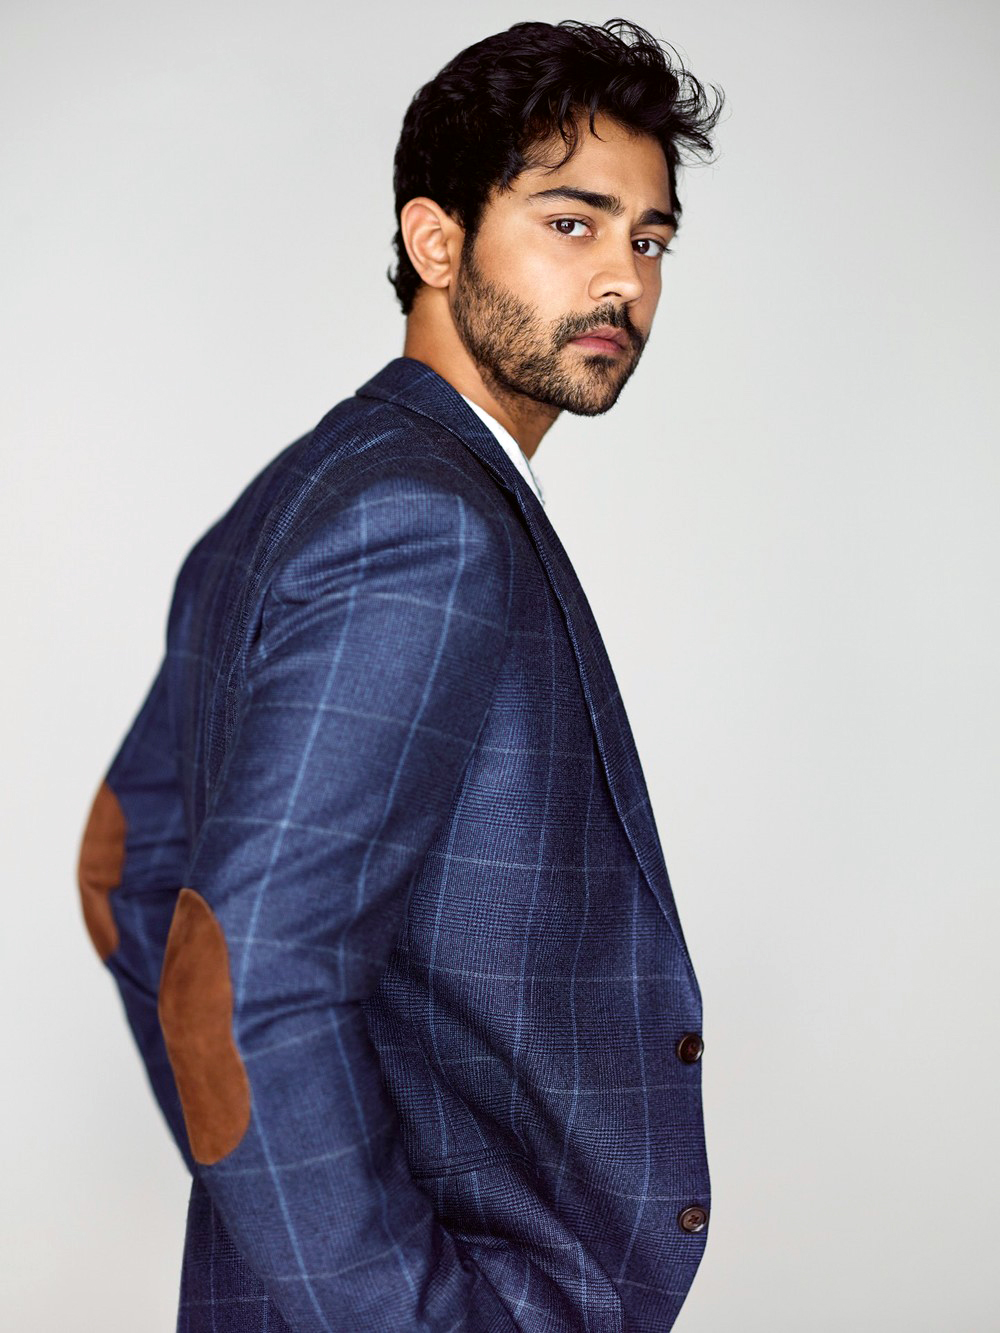 manish-dayal-pictures